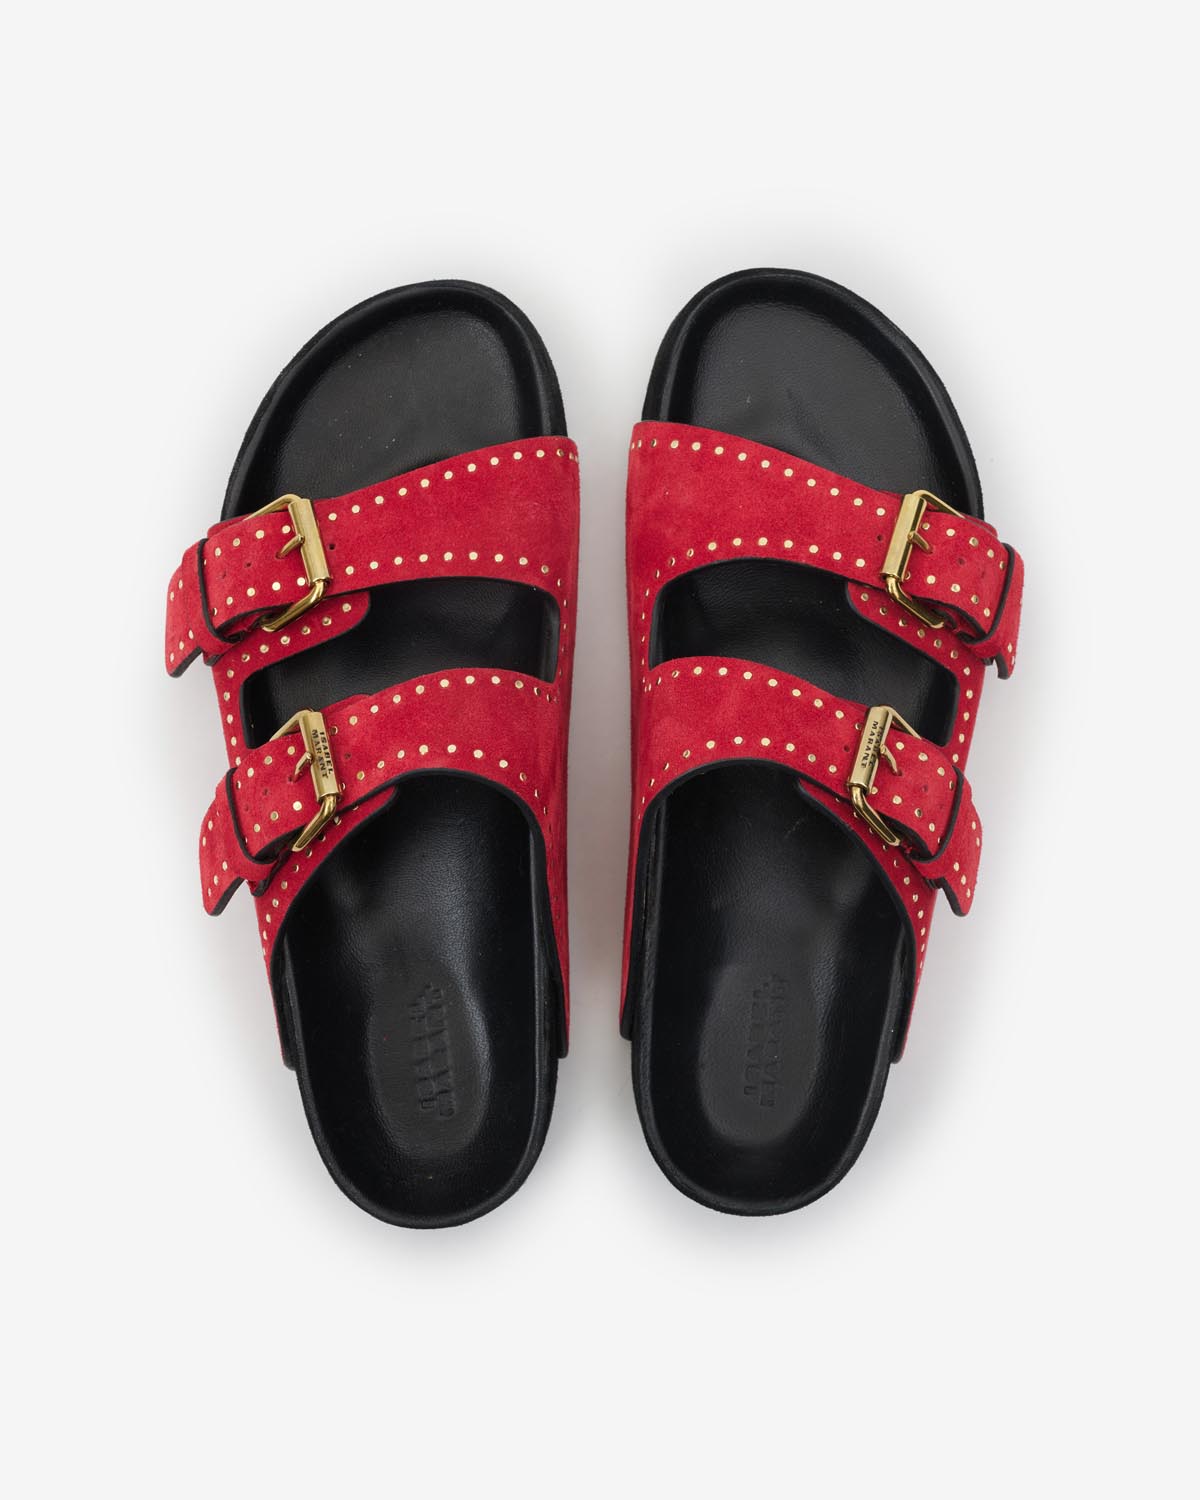 Lennyo sandals Woman Scarlet red 3